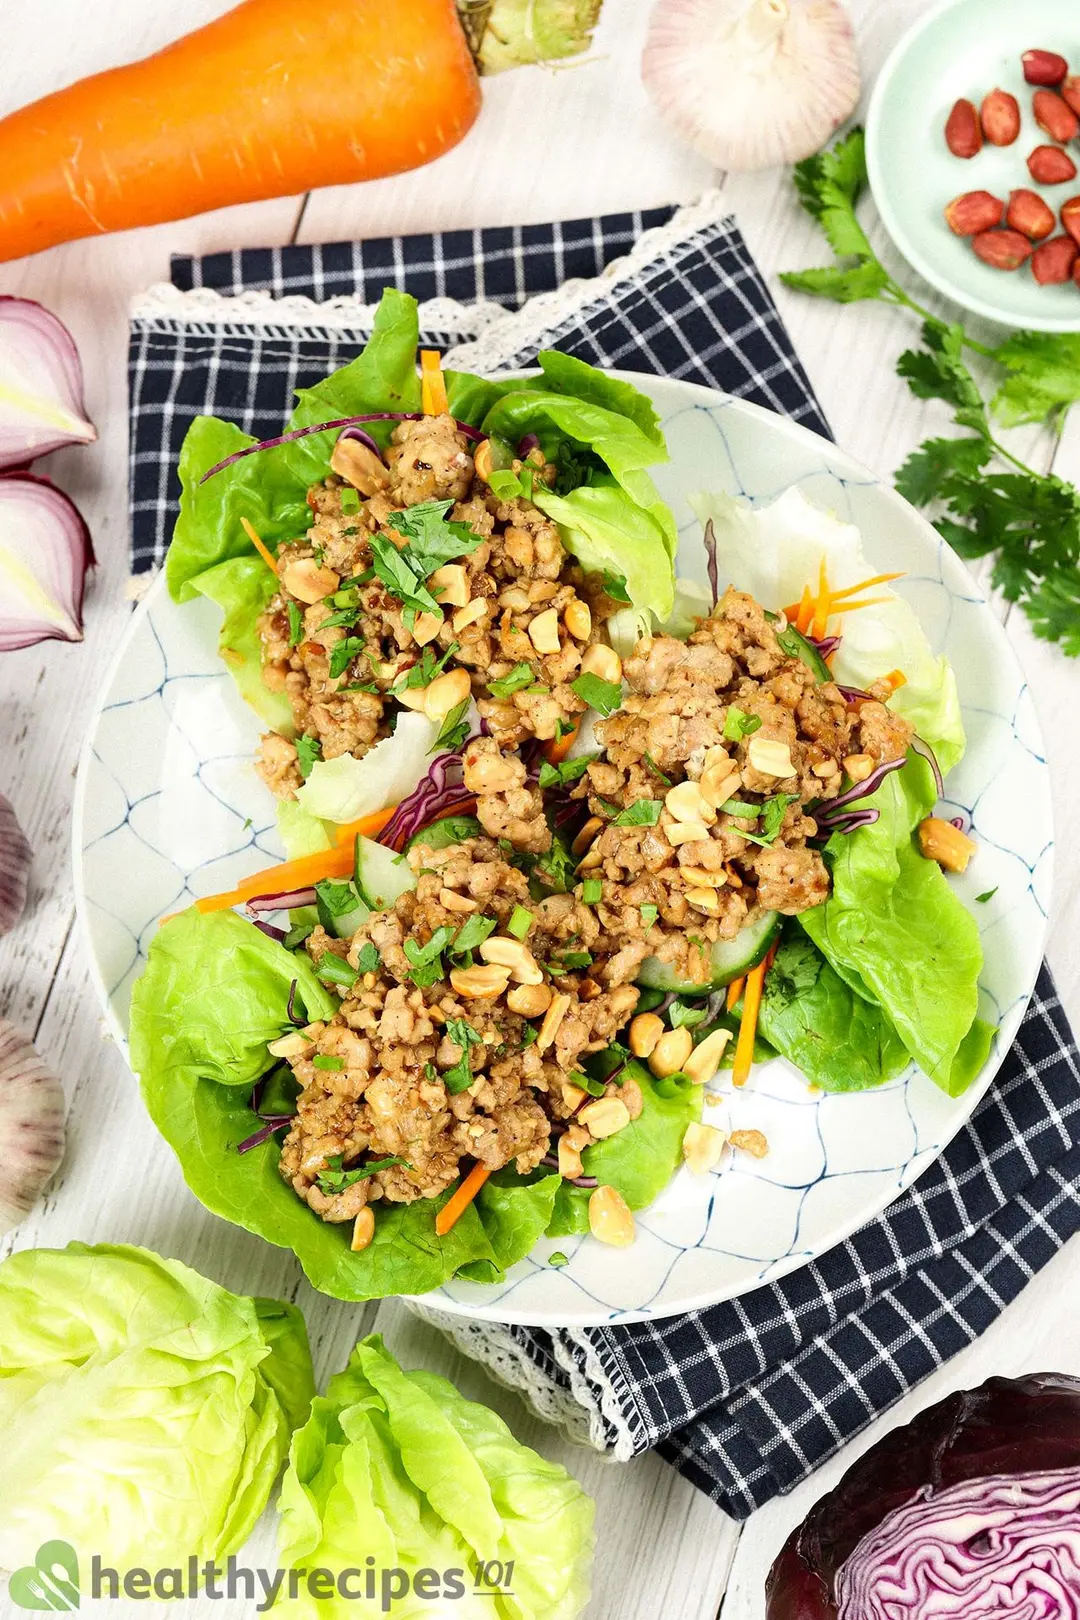 A dish of lettuce wraps placed on a folded tablecloth and surrounded by a carrot, lettuce heads, half a red cabbage, red onion halves, and coriander